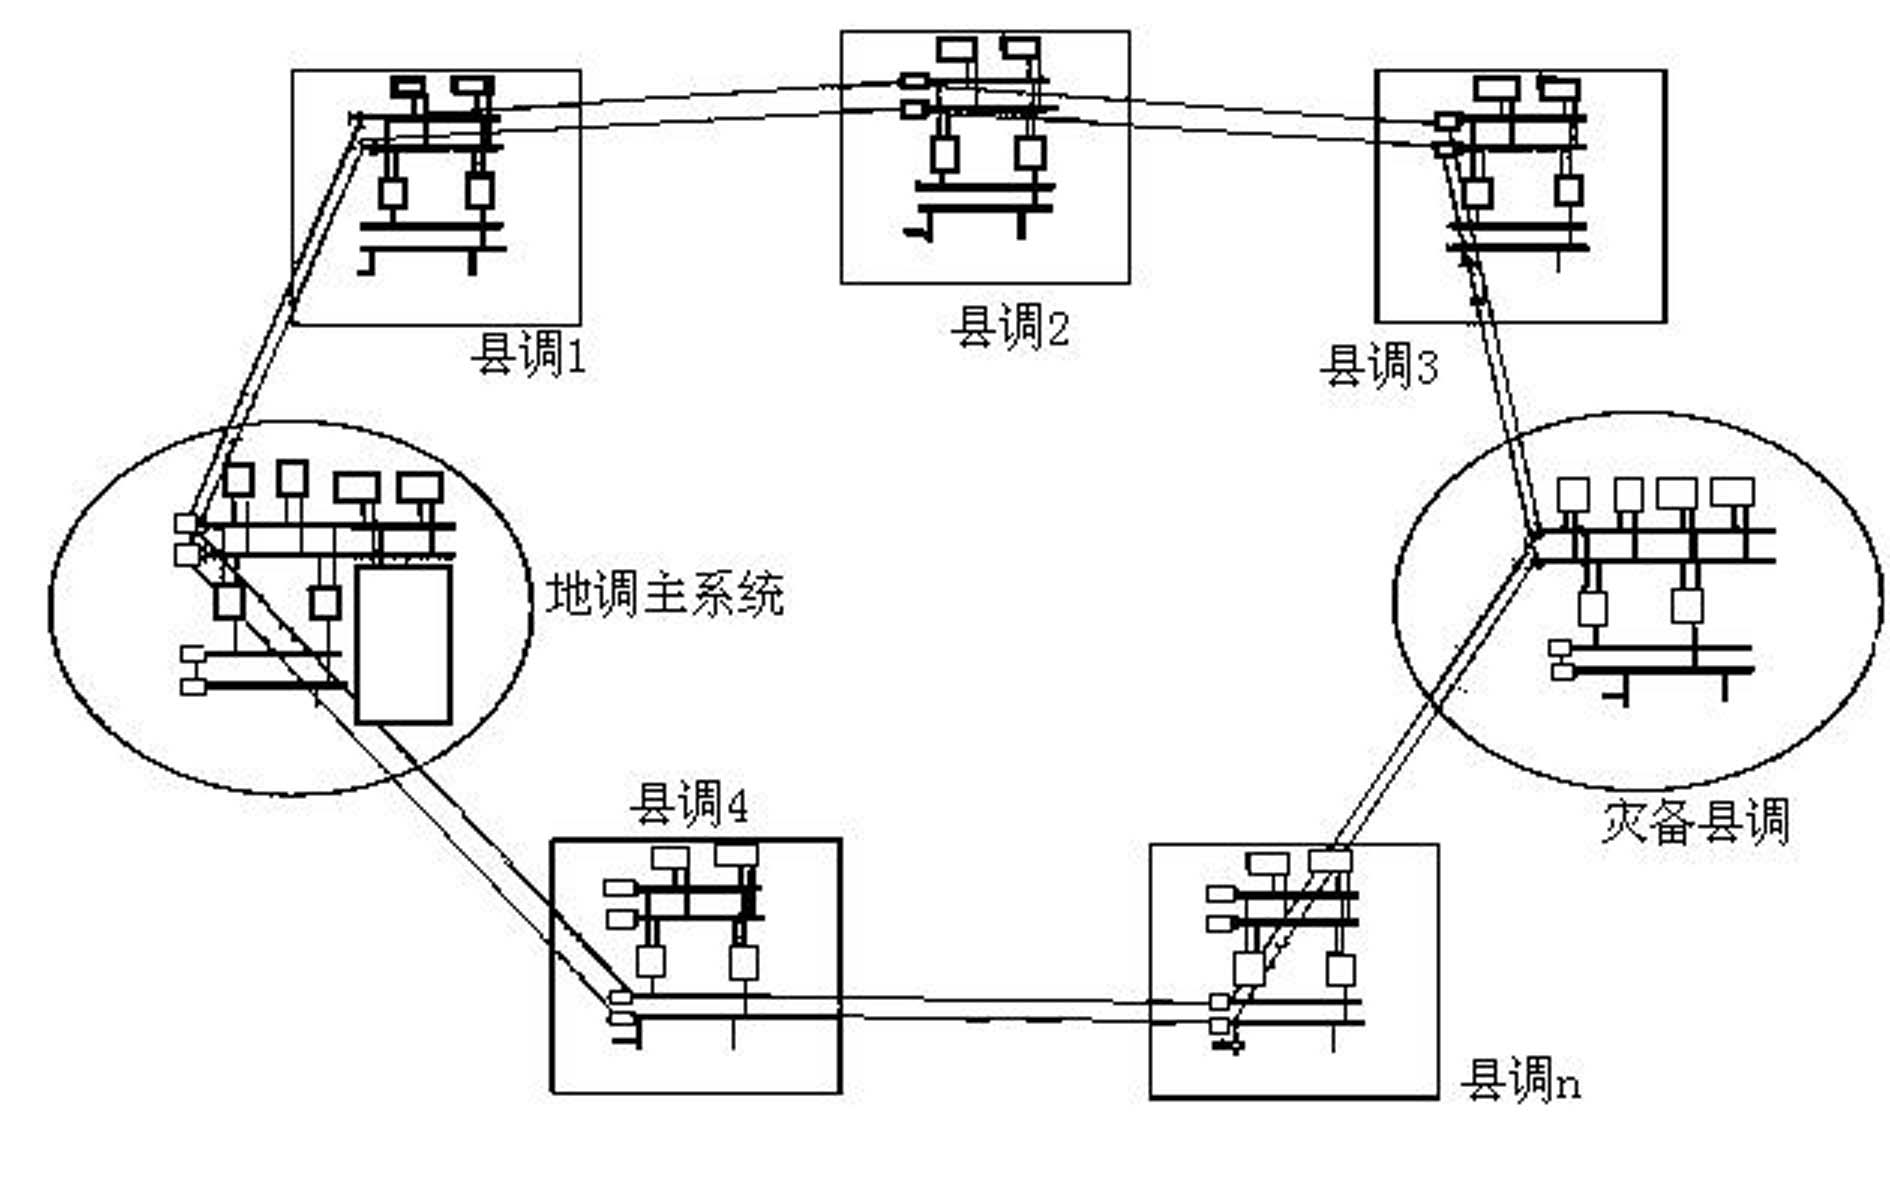 Transregional double ring network topology of electric power dispatch automation system